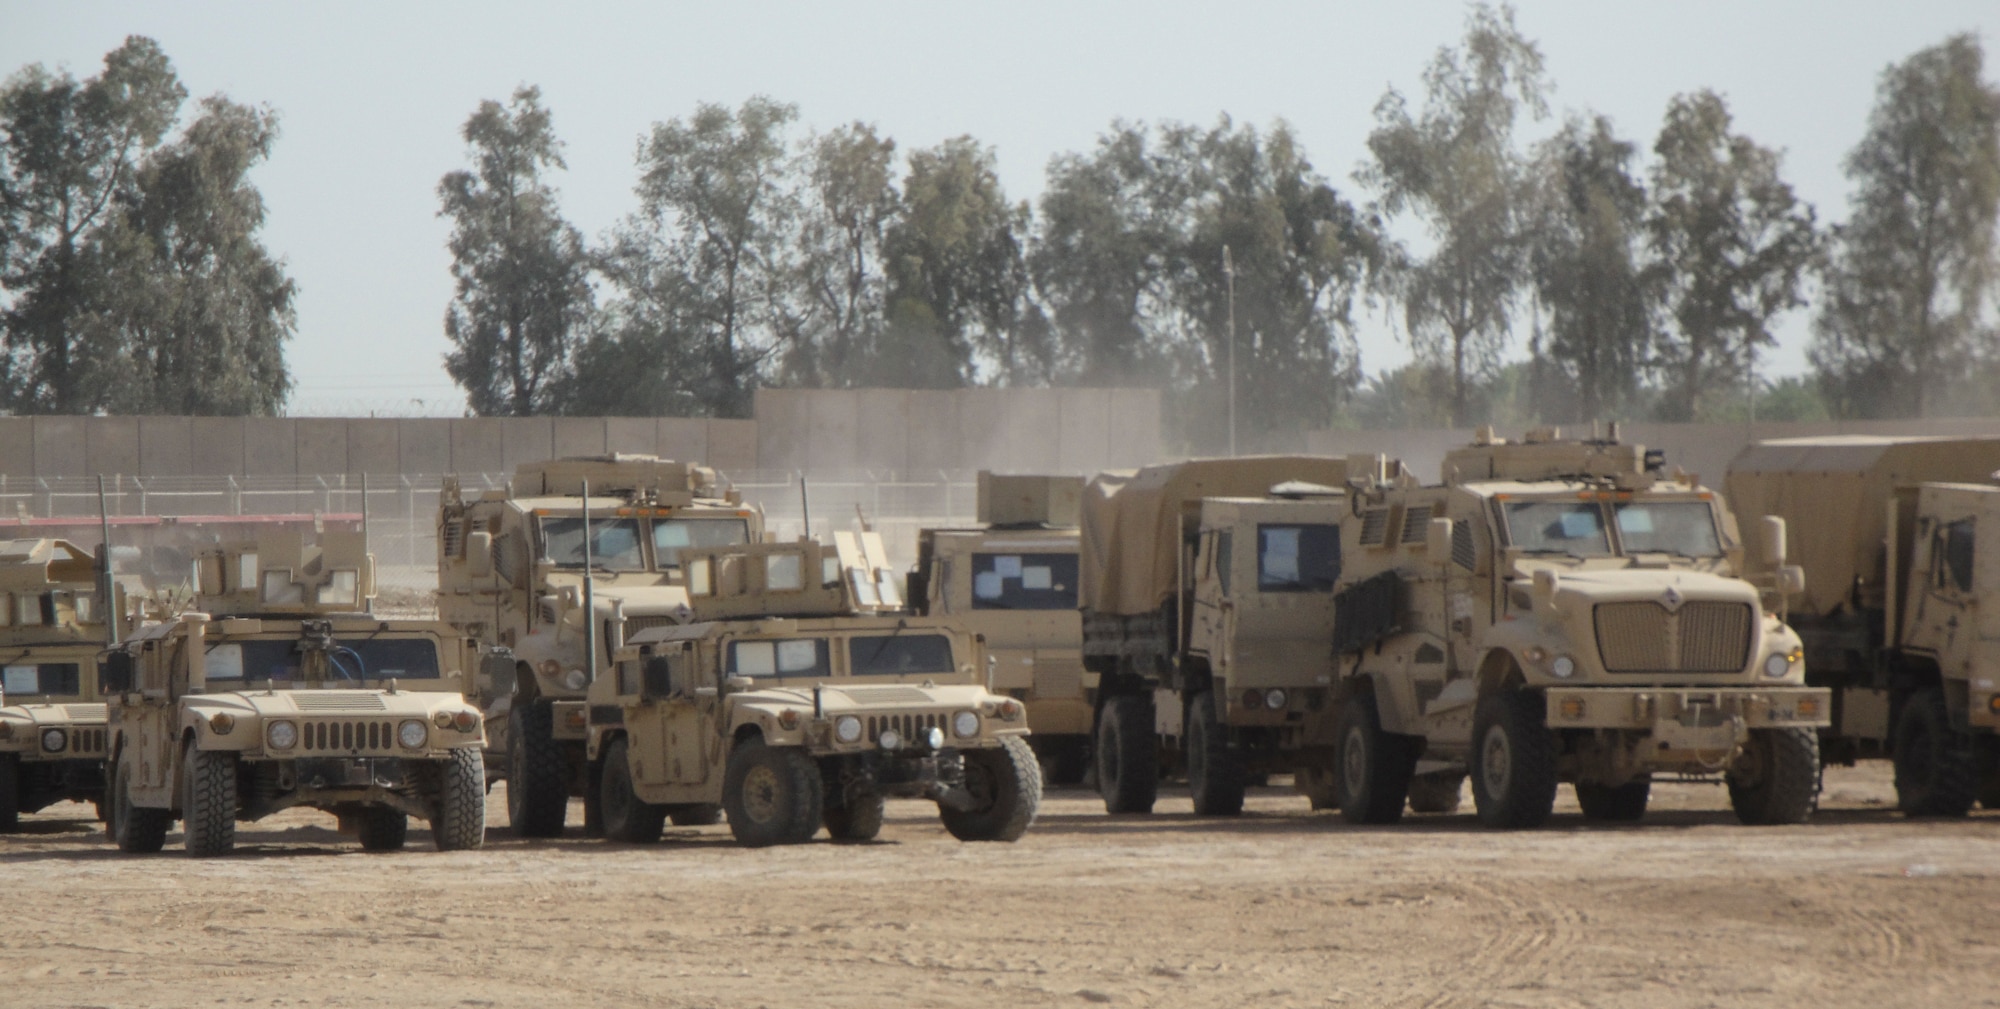 Mine Resistant Ambush Protected vehicles, along with M119 Humvee?s, and tractor-trailers also known as 915?s, getting ready for a mission outside of a forward operating base in Iraq.